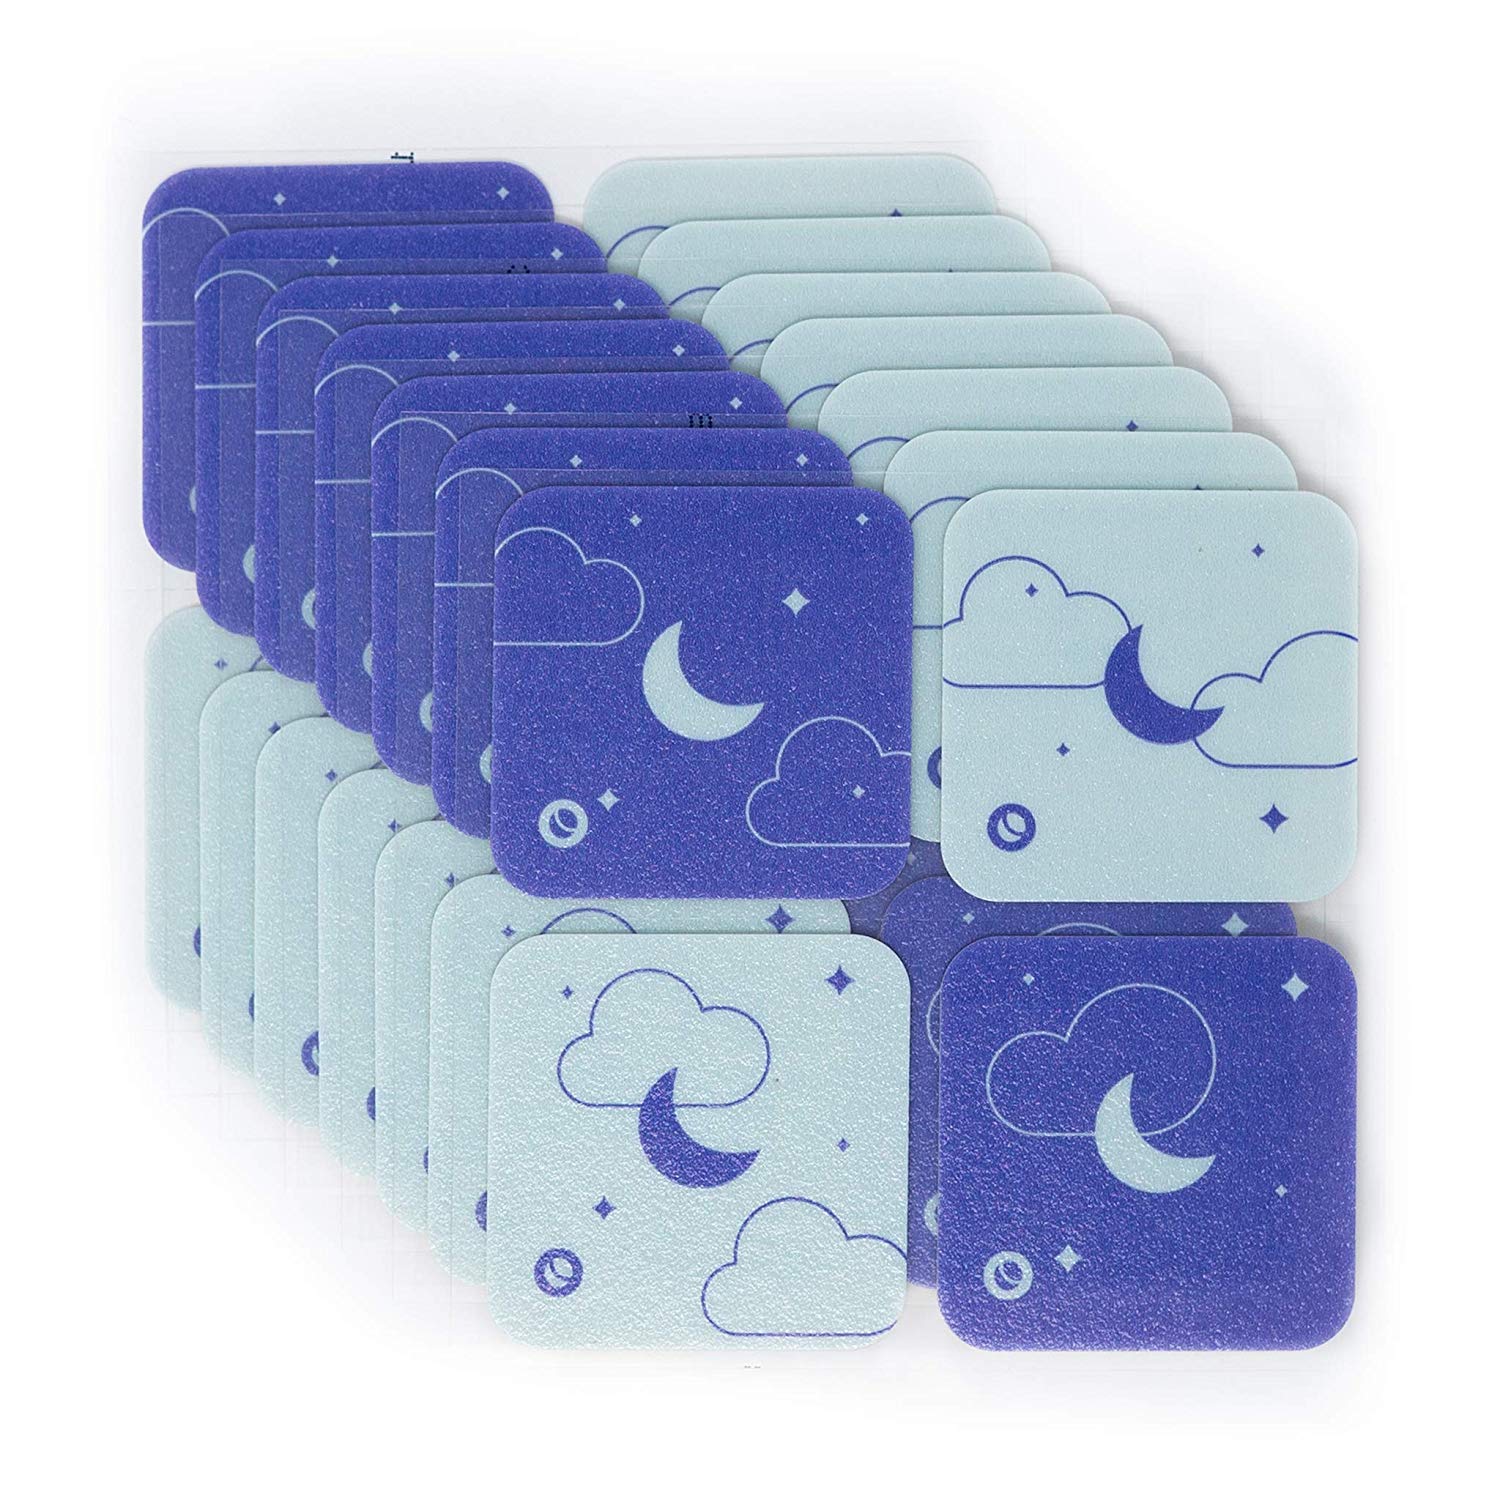 Klova Sleep Patch with Melatonin and Natural Ingredients